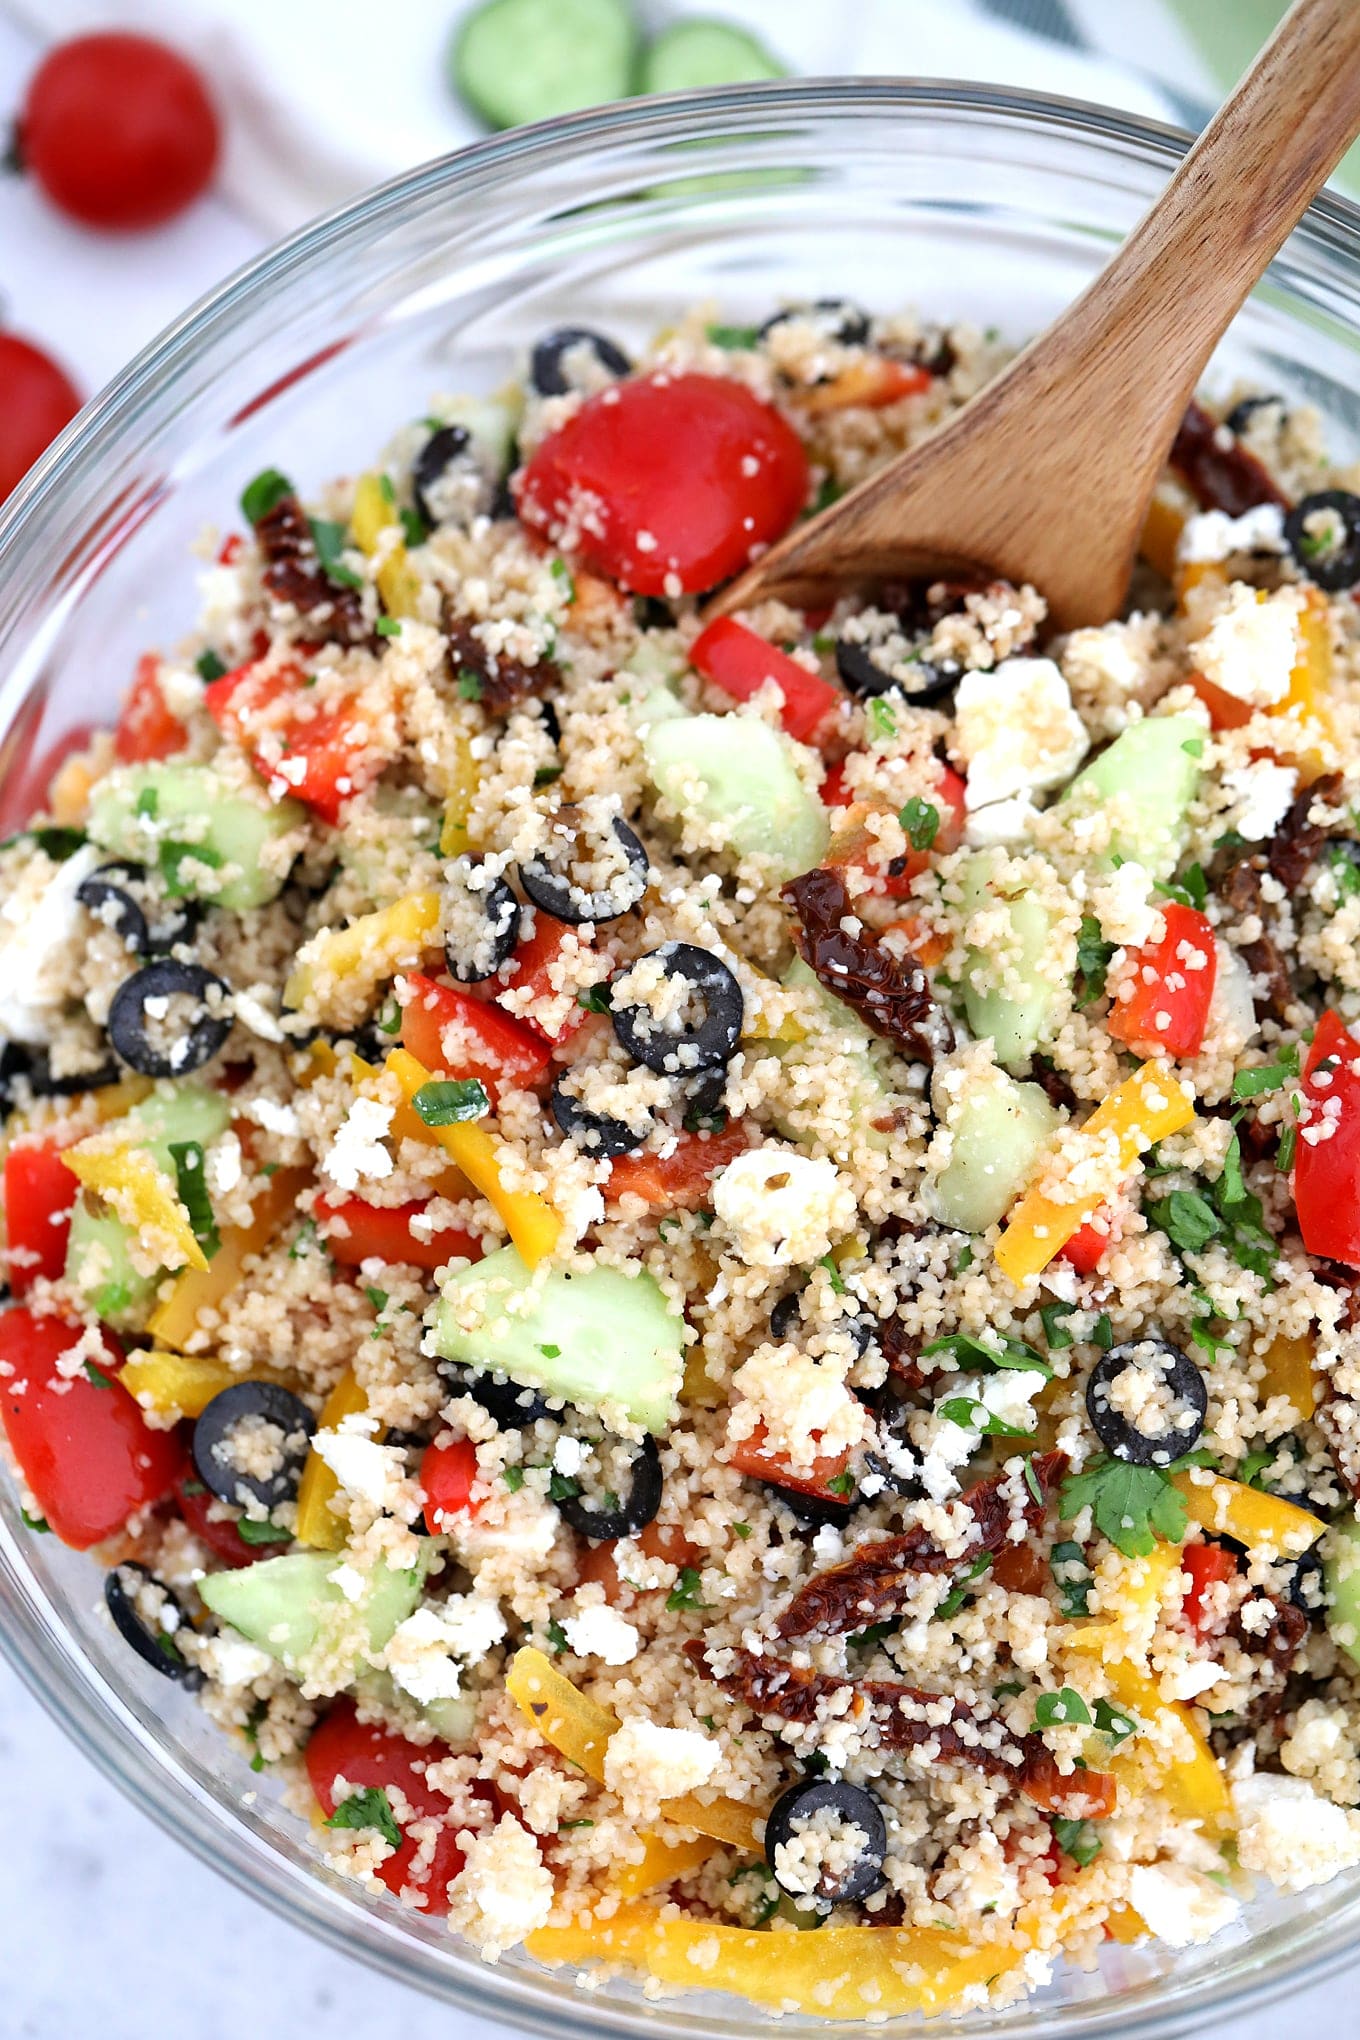 Mediterranean Couscous Salad [video] - Sweet and Savory Meals